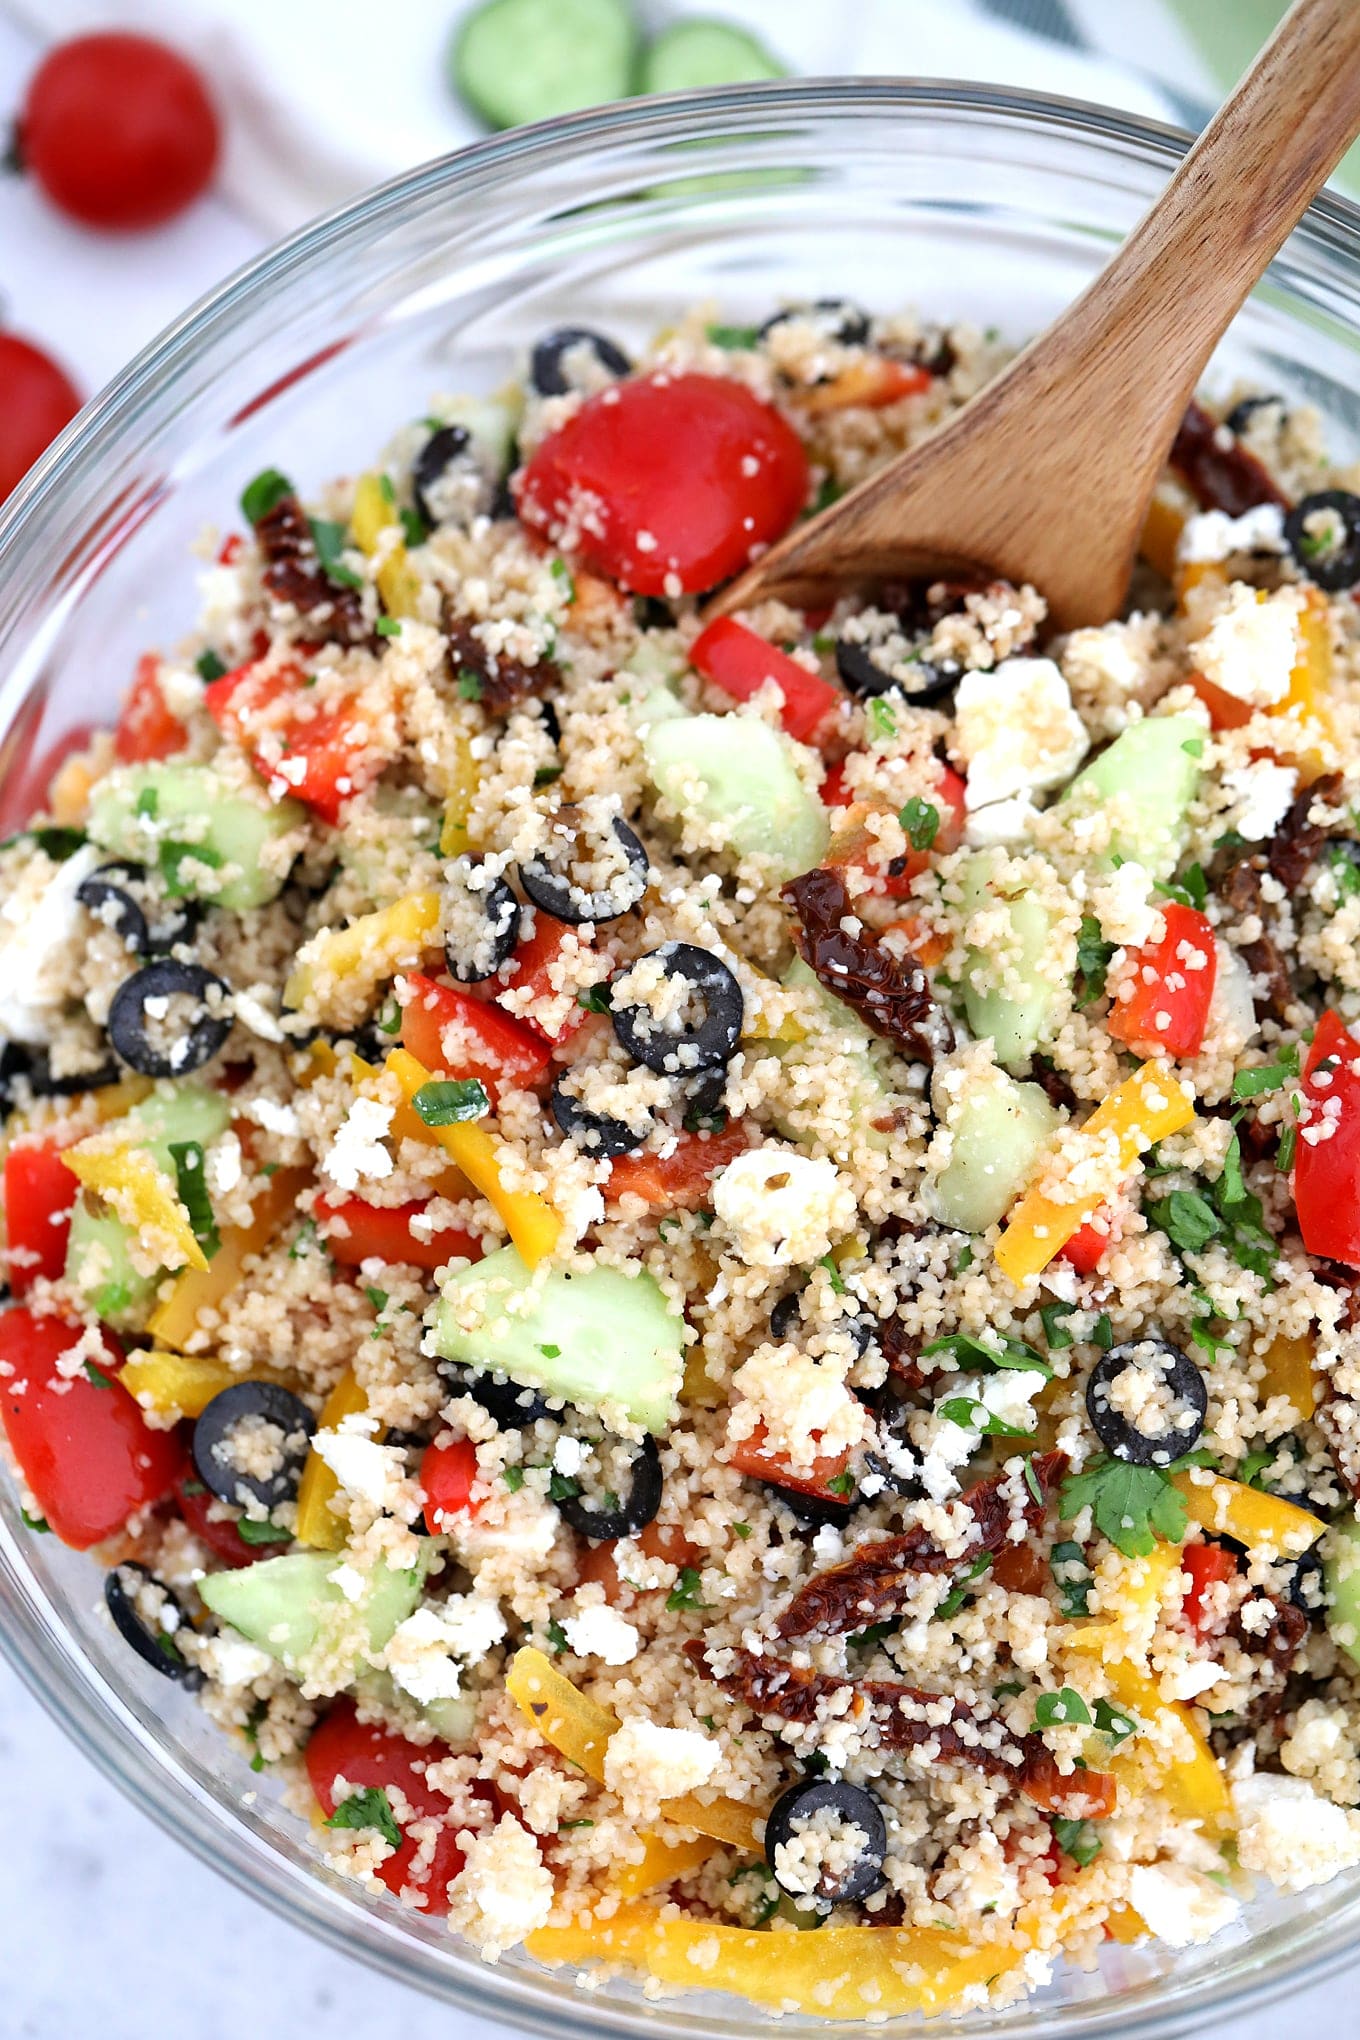 Mediterranean Couscous Salad [video] - Sweet and Savory Meals